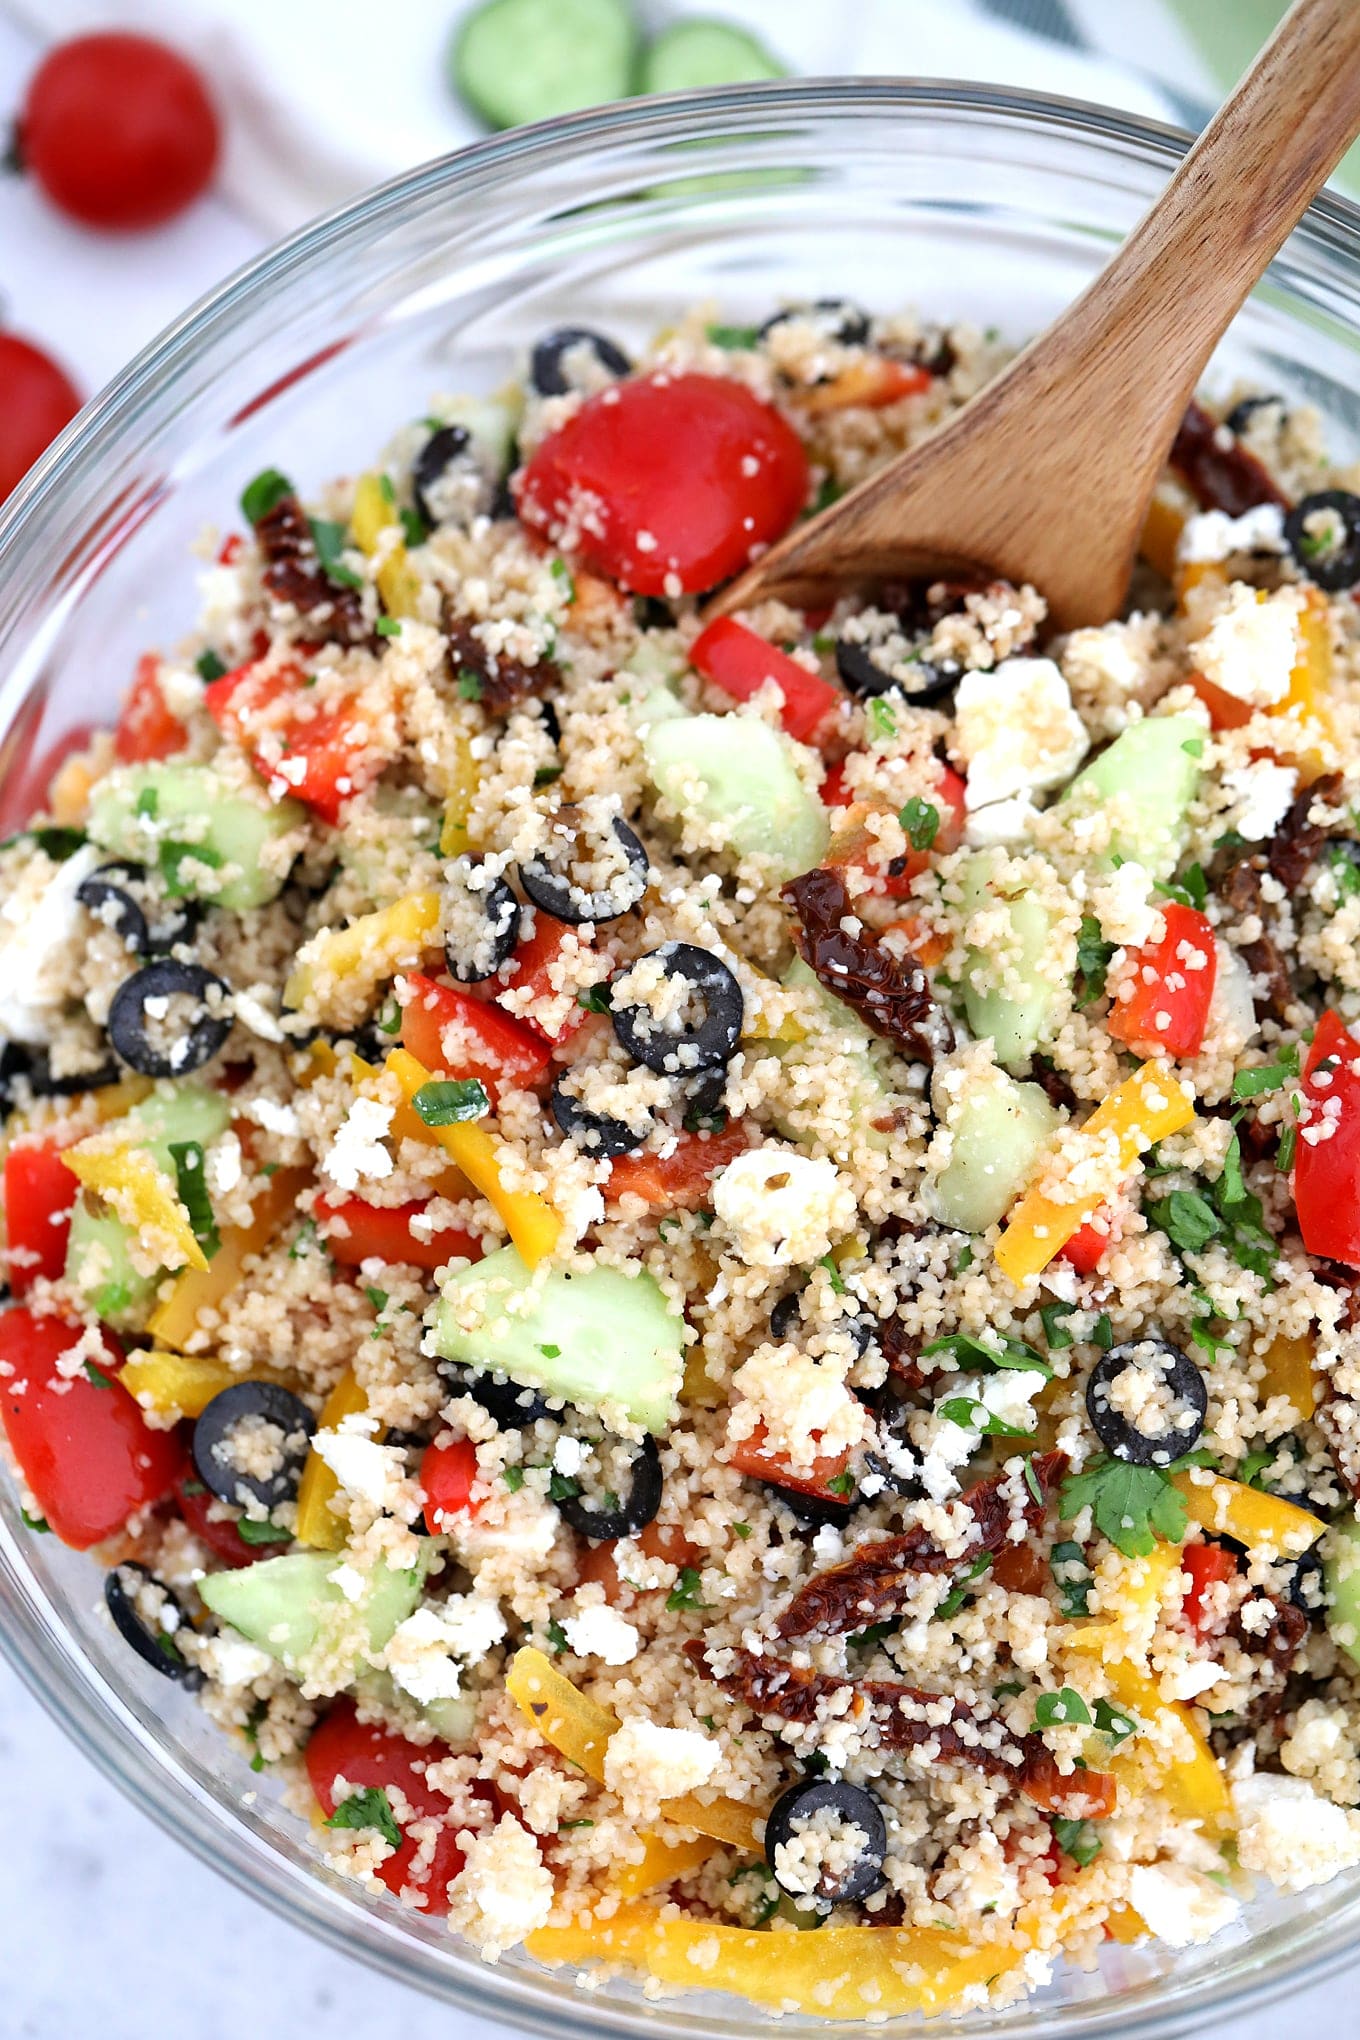 Mediterranean Couscous Salad [video] - Sweet and Savory Meals